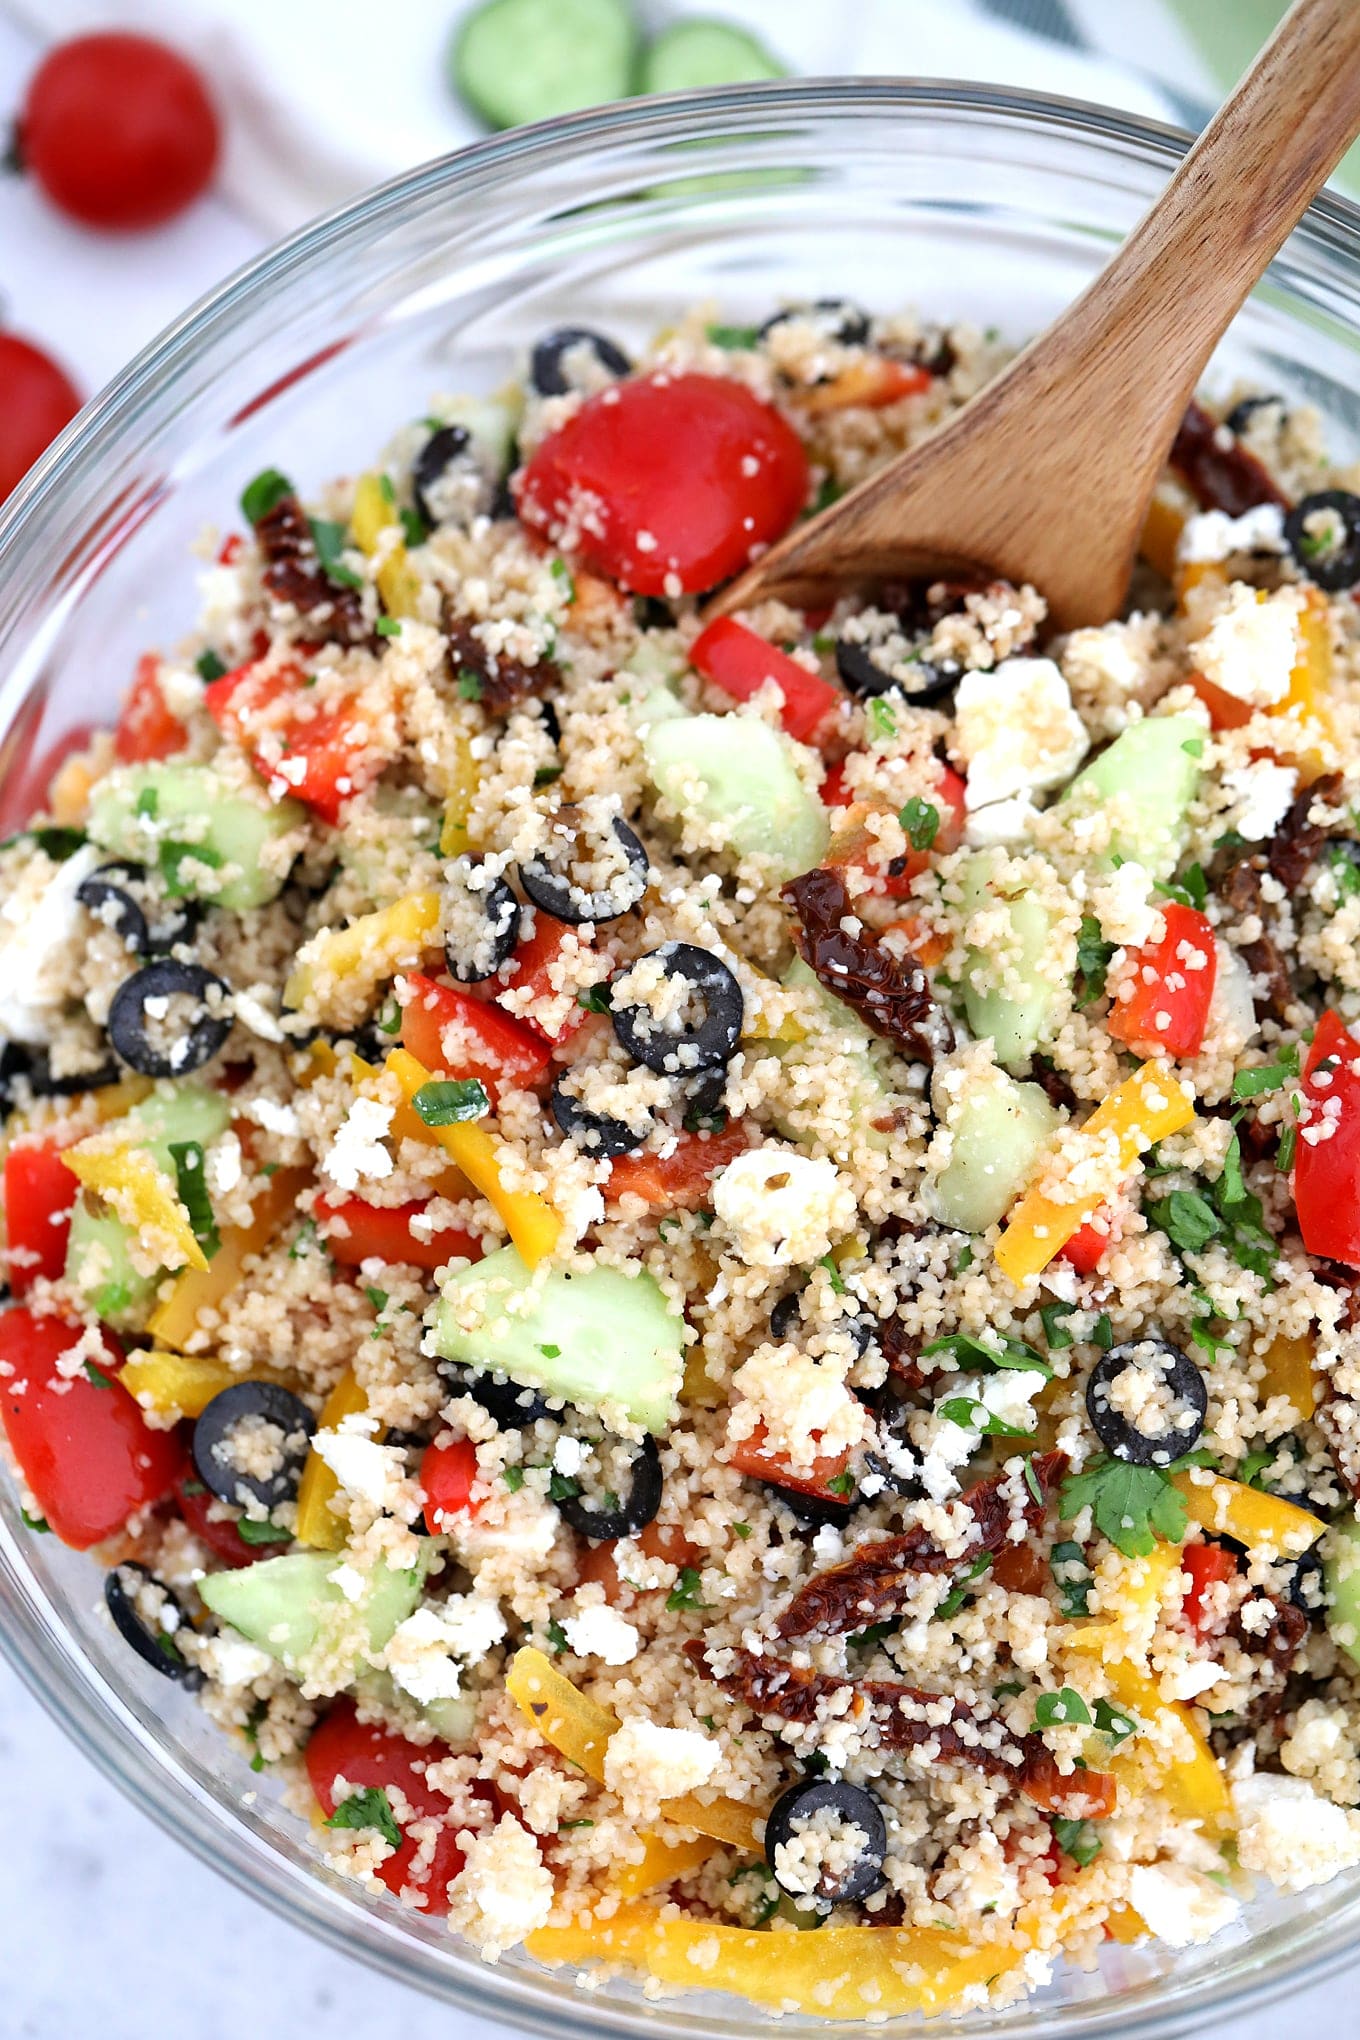 Mediterranean Couscous Salad [video] - Sweet and Savory Meals